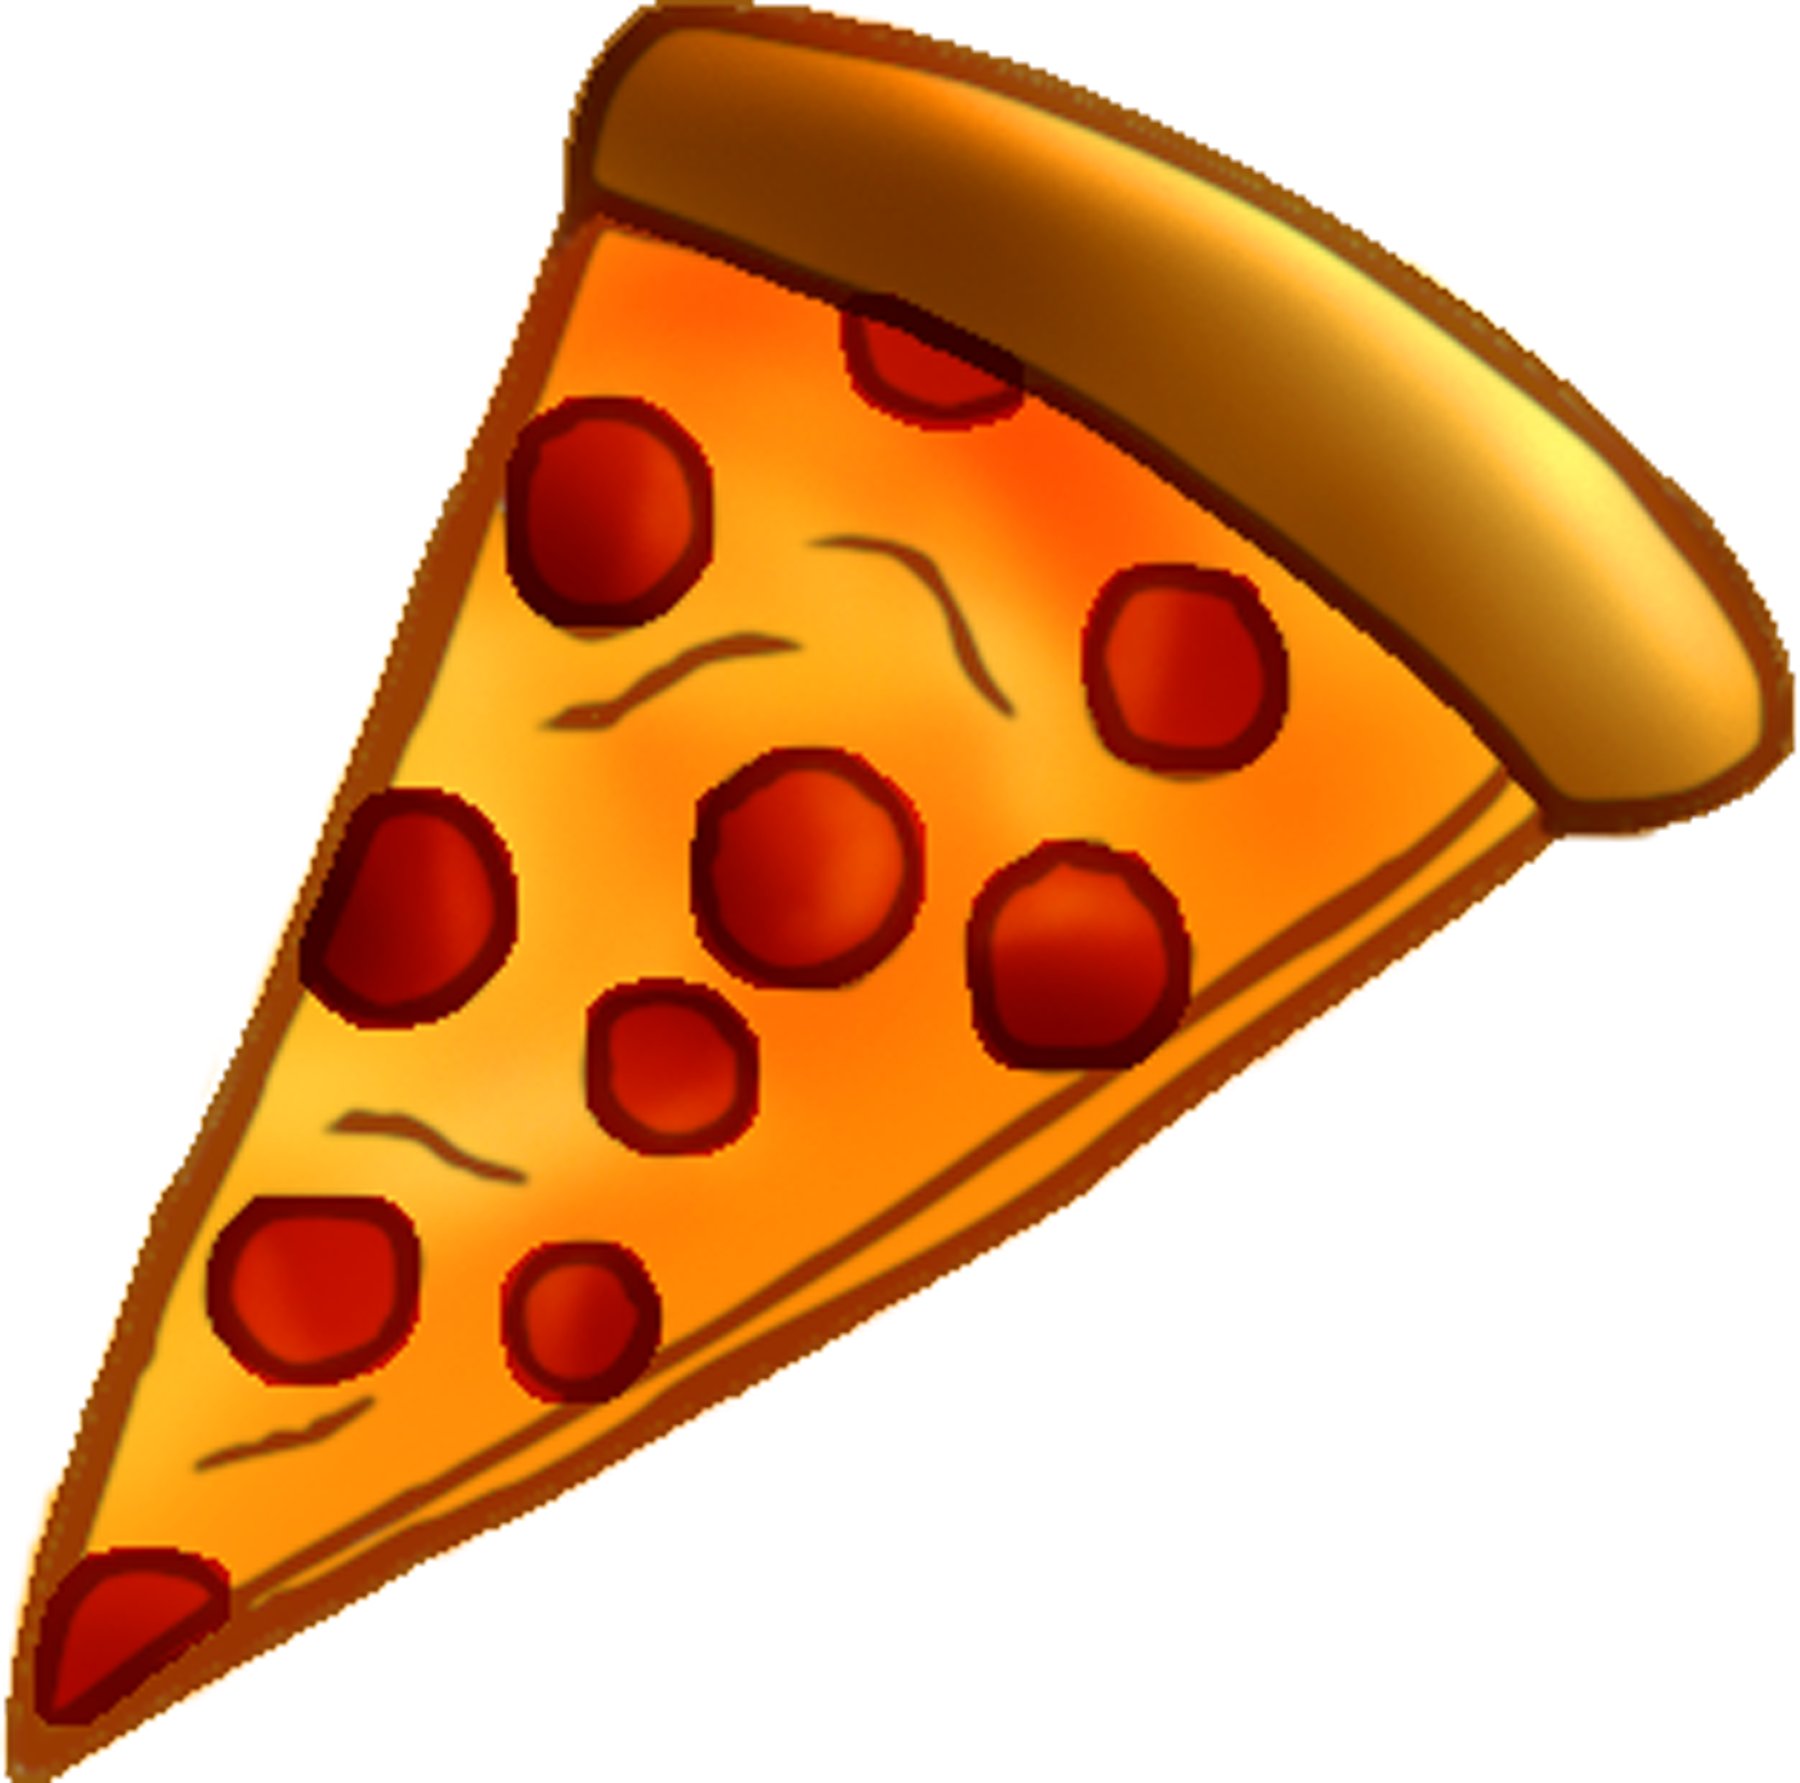 Pizza clip art free download free clipart images - Cliparting.com